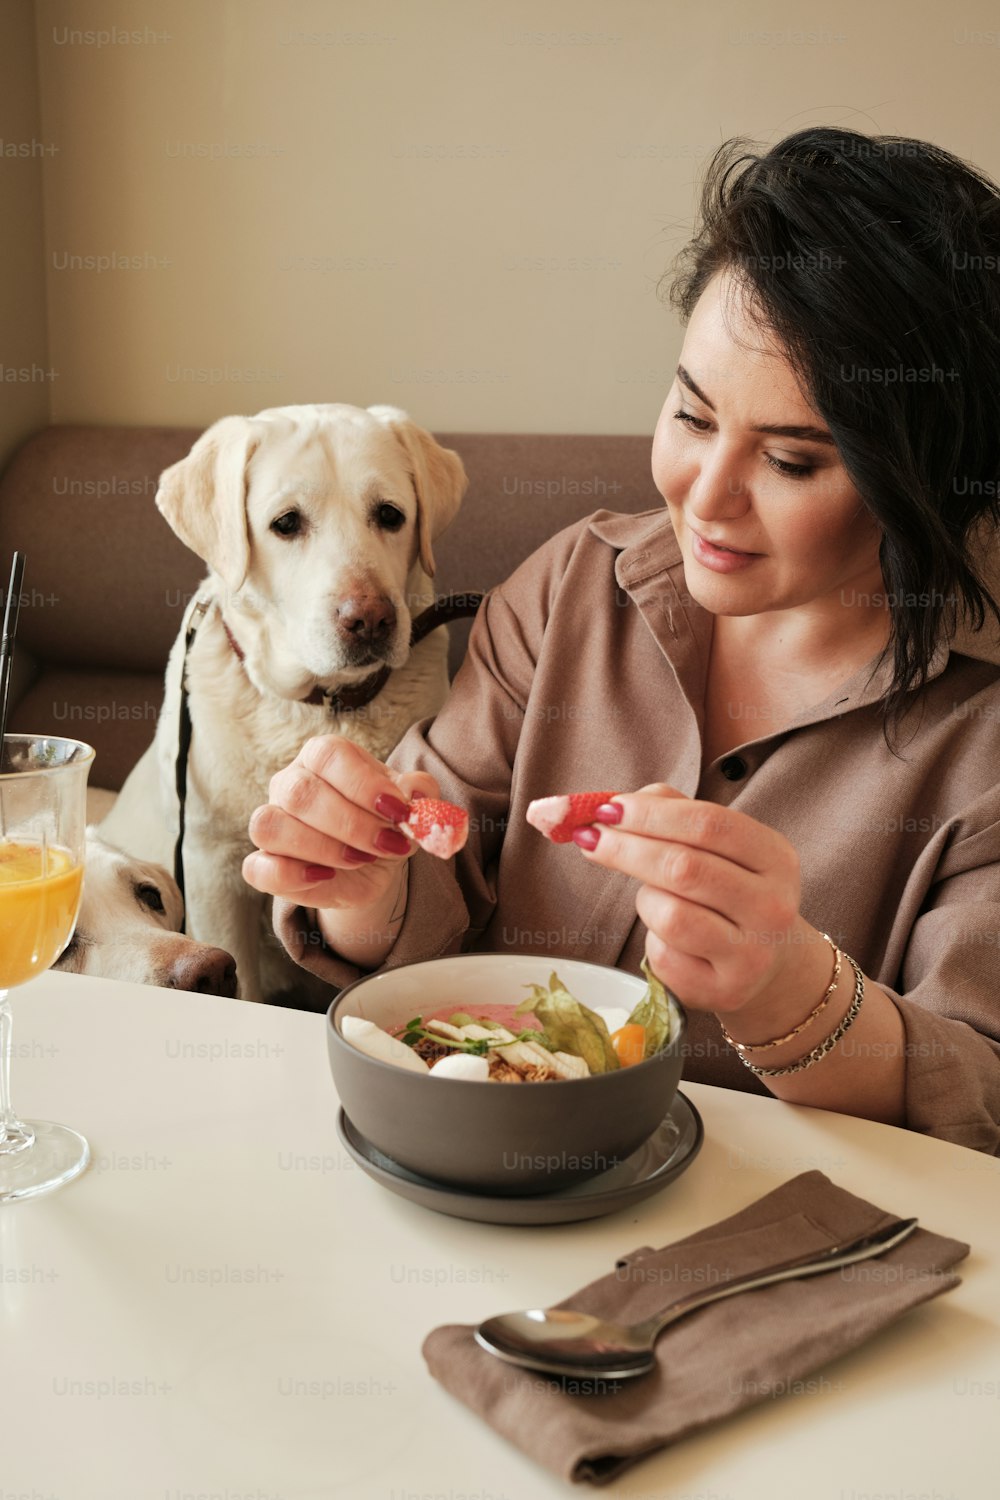 a woman sitting at a table with a bowl of food and a dog